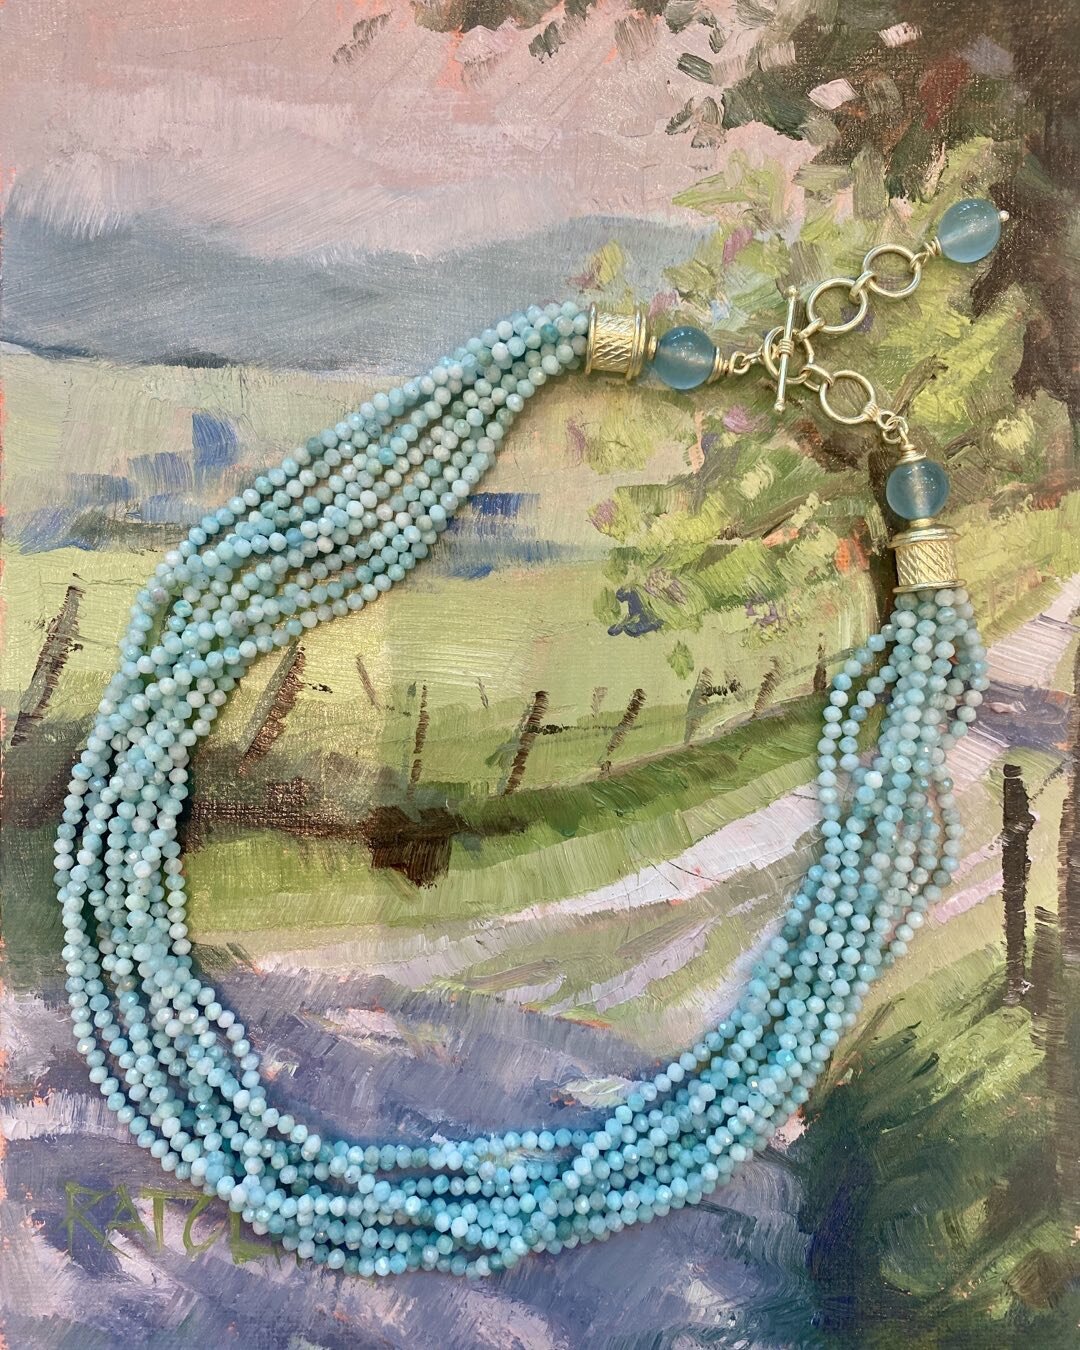 Good Morning! Please drop by @charlottecountrydayschool today and tomorrow  for the art show. What a great show of wonderful art! Check out one of my aquamarine necklaces paired with a beautiful original piece by artist patti@radcliffeart.com So happ